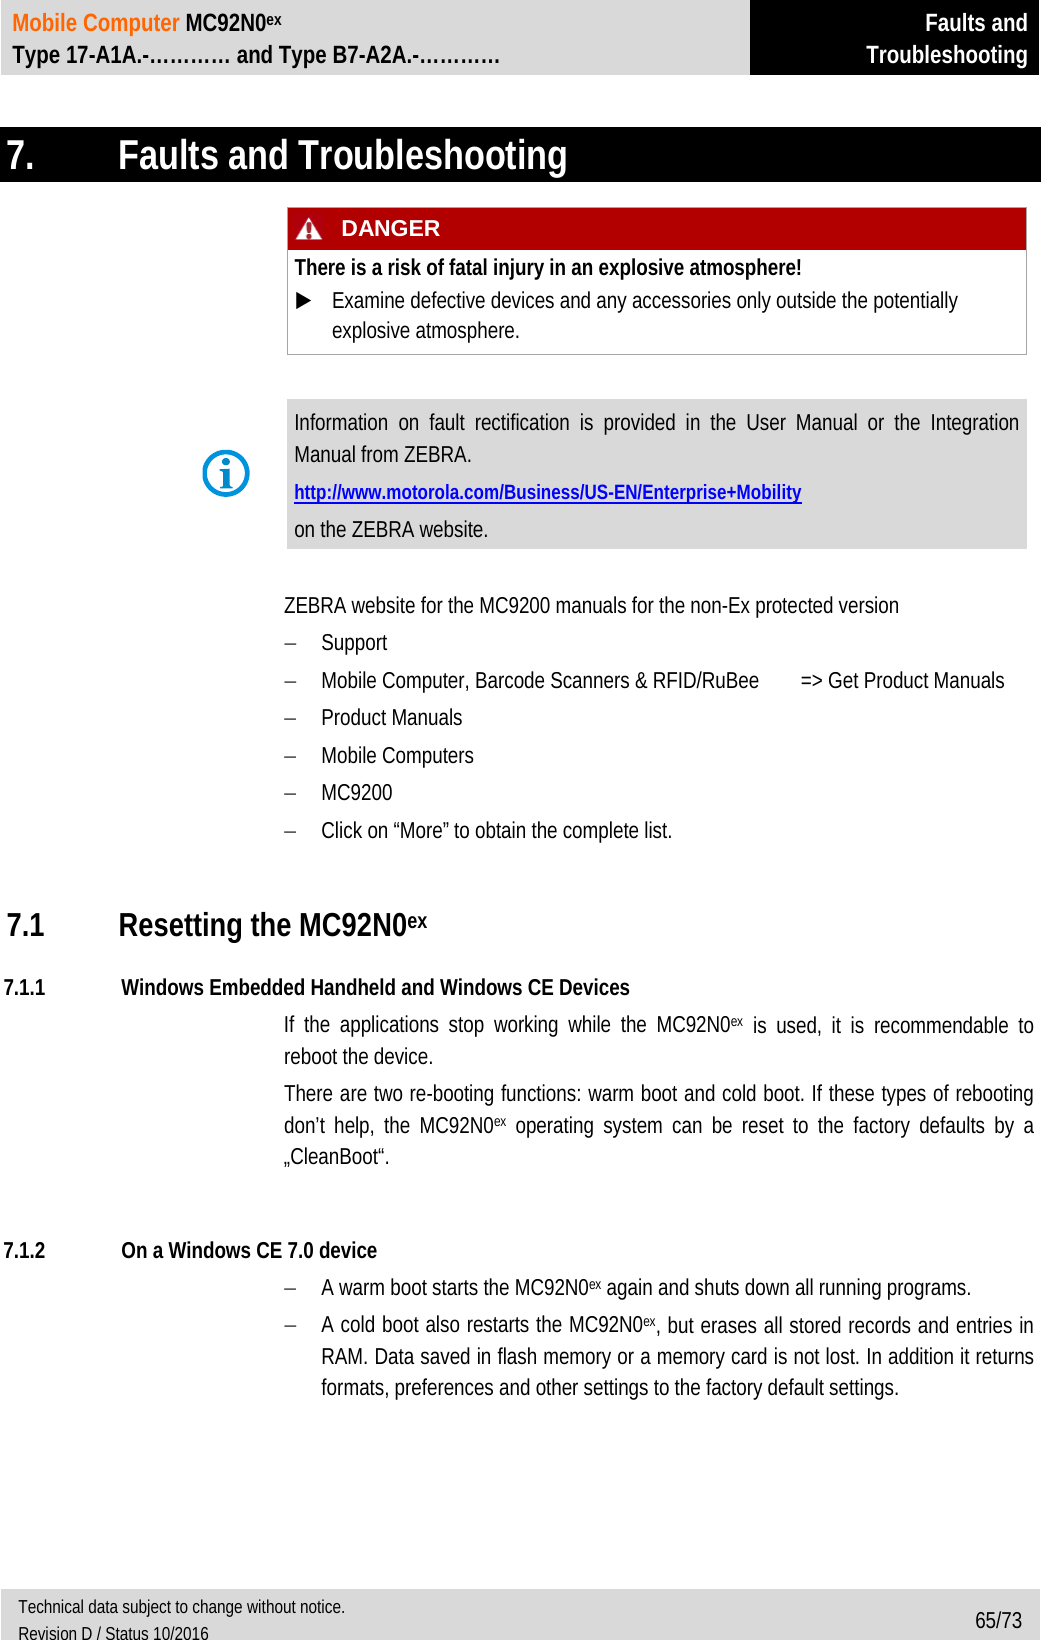 Mobile Computer MC92N0ex Type 17-A1A.-………… and Type B7-A2A.-………… Faults and Troubleshooting  Technical data subject to change without notice. Revision D / Status 10/2016 65/73   7.  Faults and Troubleshooting   DANGER There is a risk of fatal injury in an explosive atmosphere!  Examine defective devices and any accessories only outside the potentially explosive atmosphere.   Information on fault rectification is provided in the User Manual or the Integration Manual from ZEBRA. http://www.motorola.com/Business/US-EN/Enterprise+Mobility on the ZEBRA website.  ZEBRA website for the MC9200 manuals for the non-Ex protected version − Support − Mobile Computer, Barcode Scanners &amp; RFID/RuBee =&gt; Get Product Manuals − Product Manuals − Mobile Computers − MC9200 − Click on “More” to obtain the complete list.   7.1 Resetting the MC92N0ex 7.1.1 Windows Embedded Handheld and Windows CE Devices If the applications stop working while the MC92N0ex is used, it is recommendable to reboot the device.  There are two re-booting functions: warm boot and cold boot. If these types of rebooting don’t help, the MC92N0ex operating system can be reset to the factory defaults by a „CleanBoot“.  7.1.2 On a Windows CE 7.0 device − A warm boot starts the MC92N0ex again and shuts down all running programs. − A cold boot also restarts the MC92N0ex, but erases all stored records and entries in RAM. Data saved in flash memory or a memory card is not lost. In addition it returns formats, preferences and other settings to the factory default settings. 